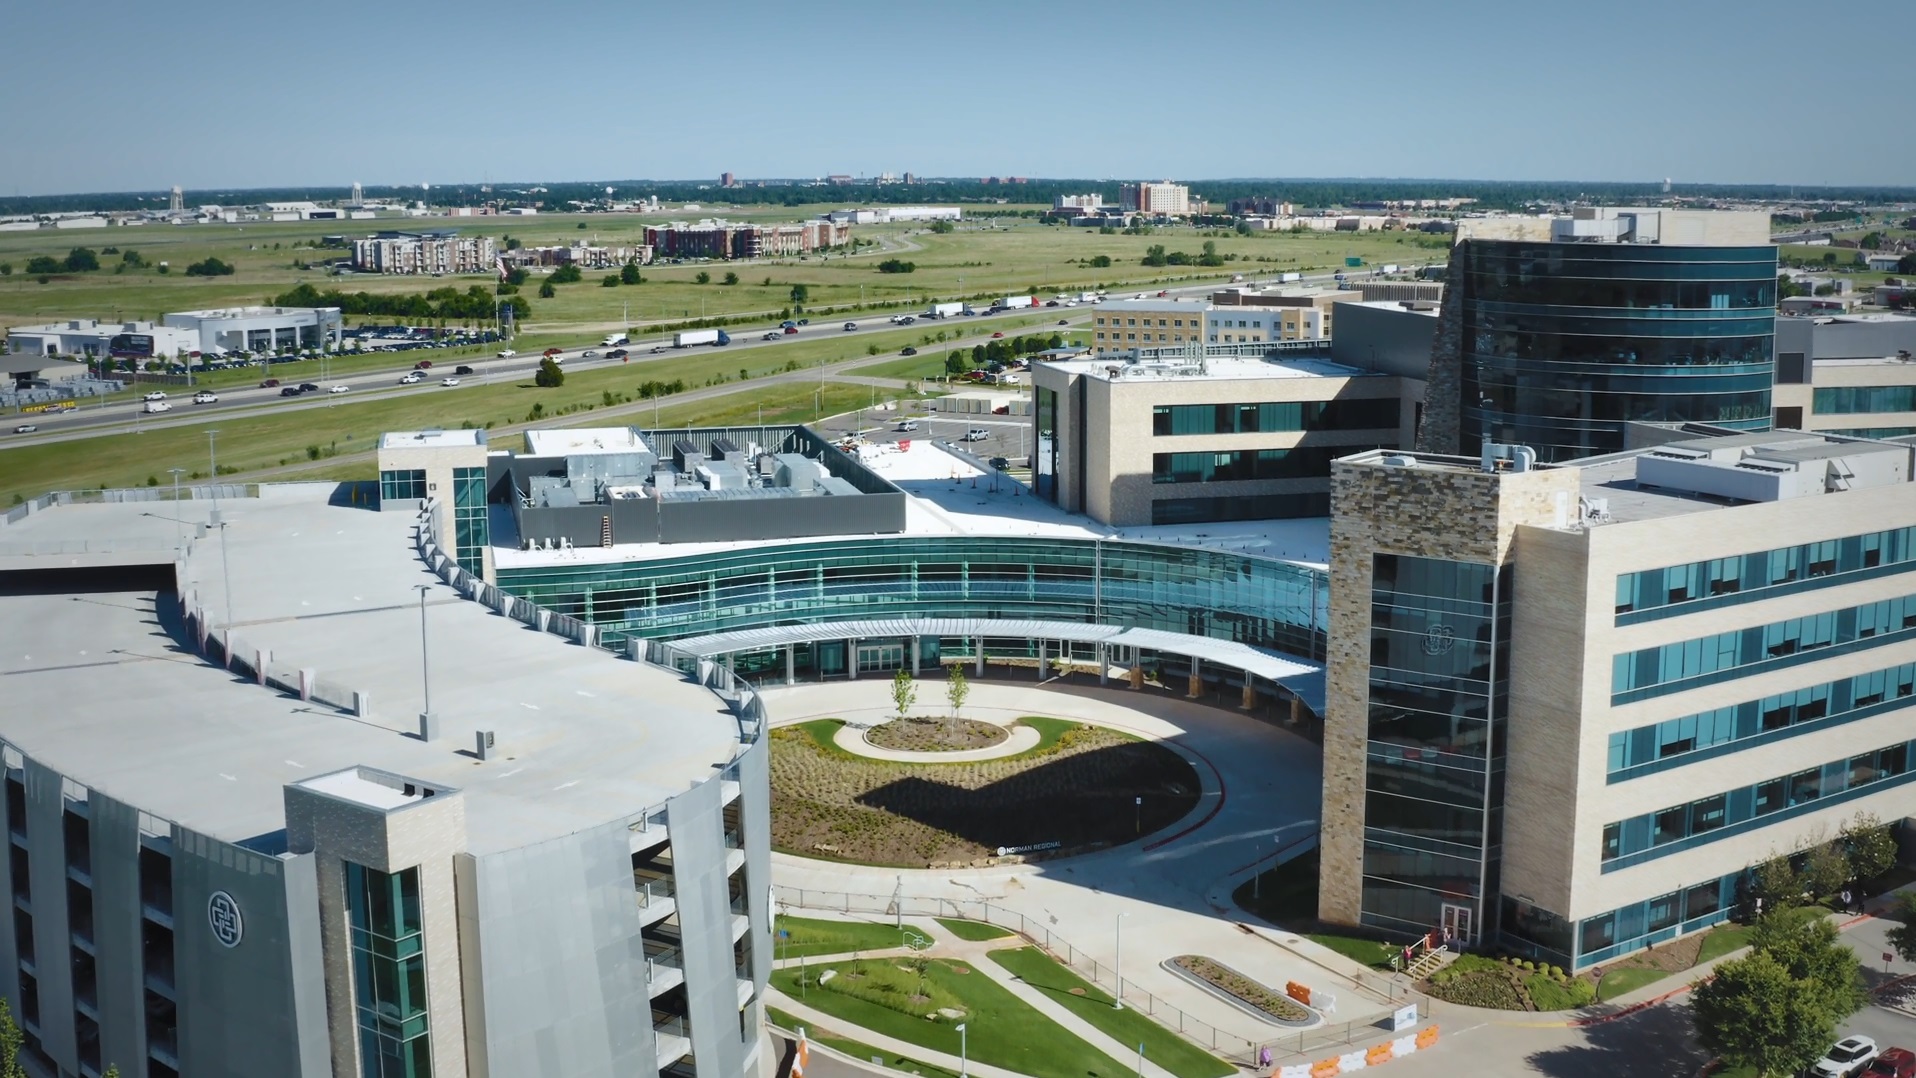 Aerial view of the new Norman Regional Hospital showing the main entrance.